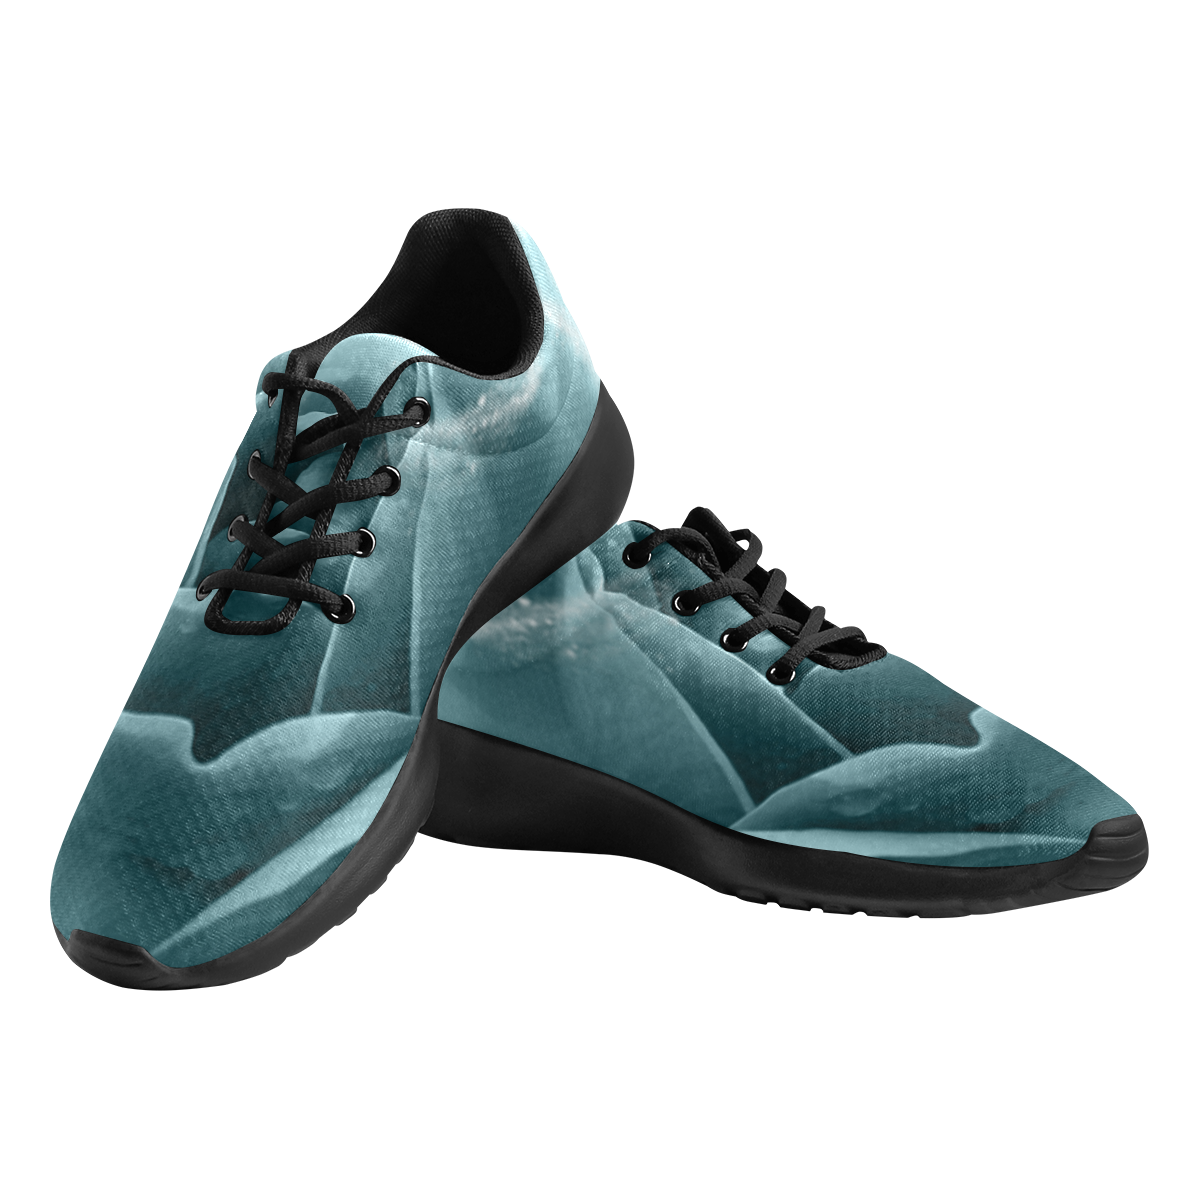 The blue rose Women's Athletic Shoes (Model 0200)